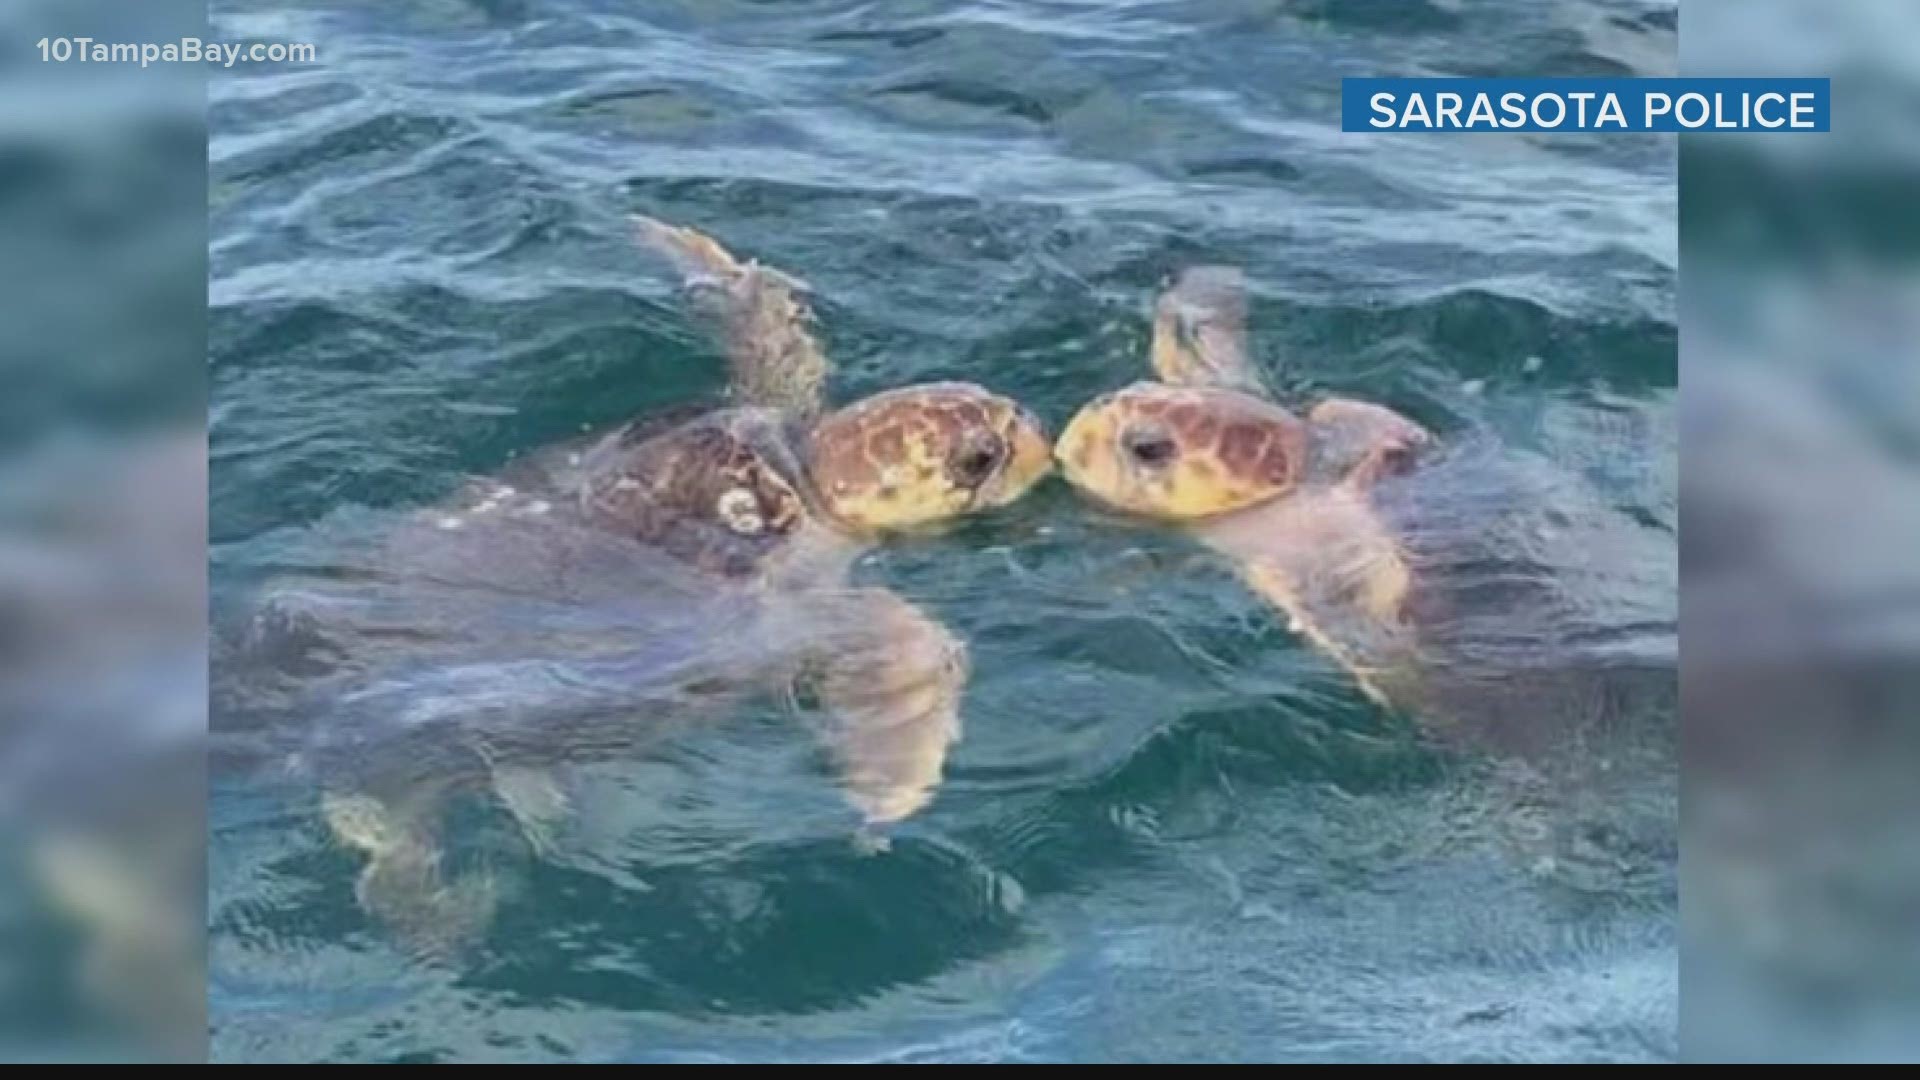 The Sarasota Police Department managed to capture the moment it appears two sea turtles are sharing a kiss.